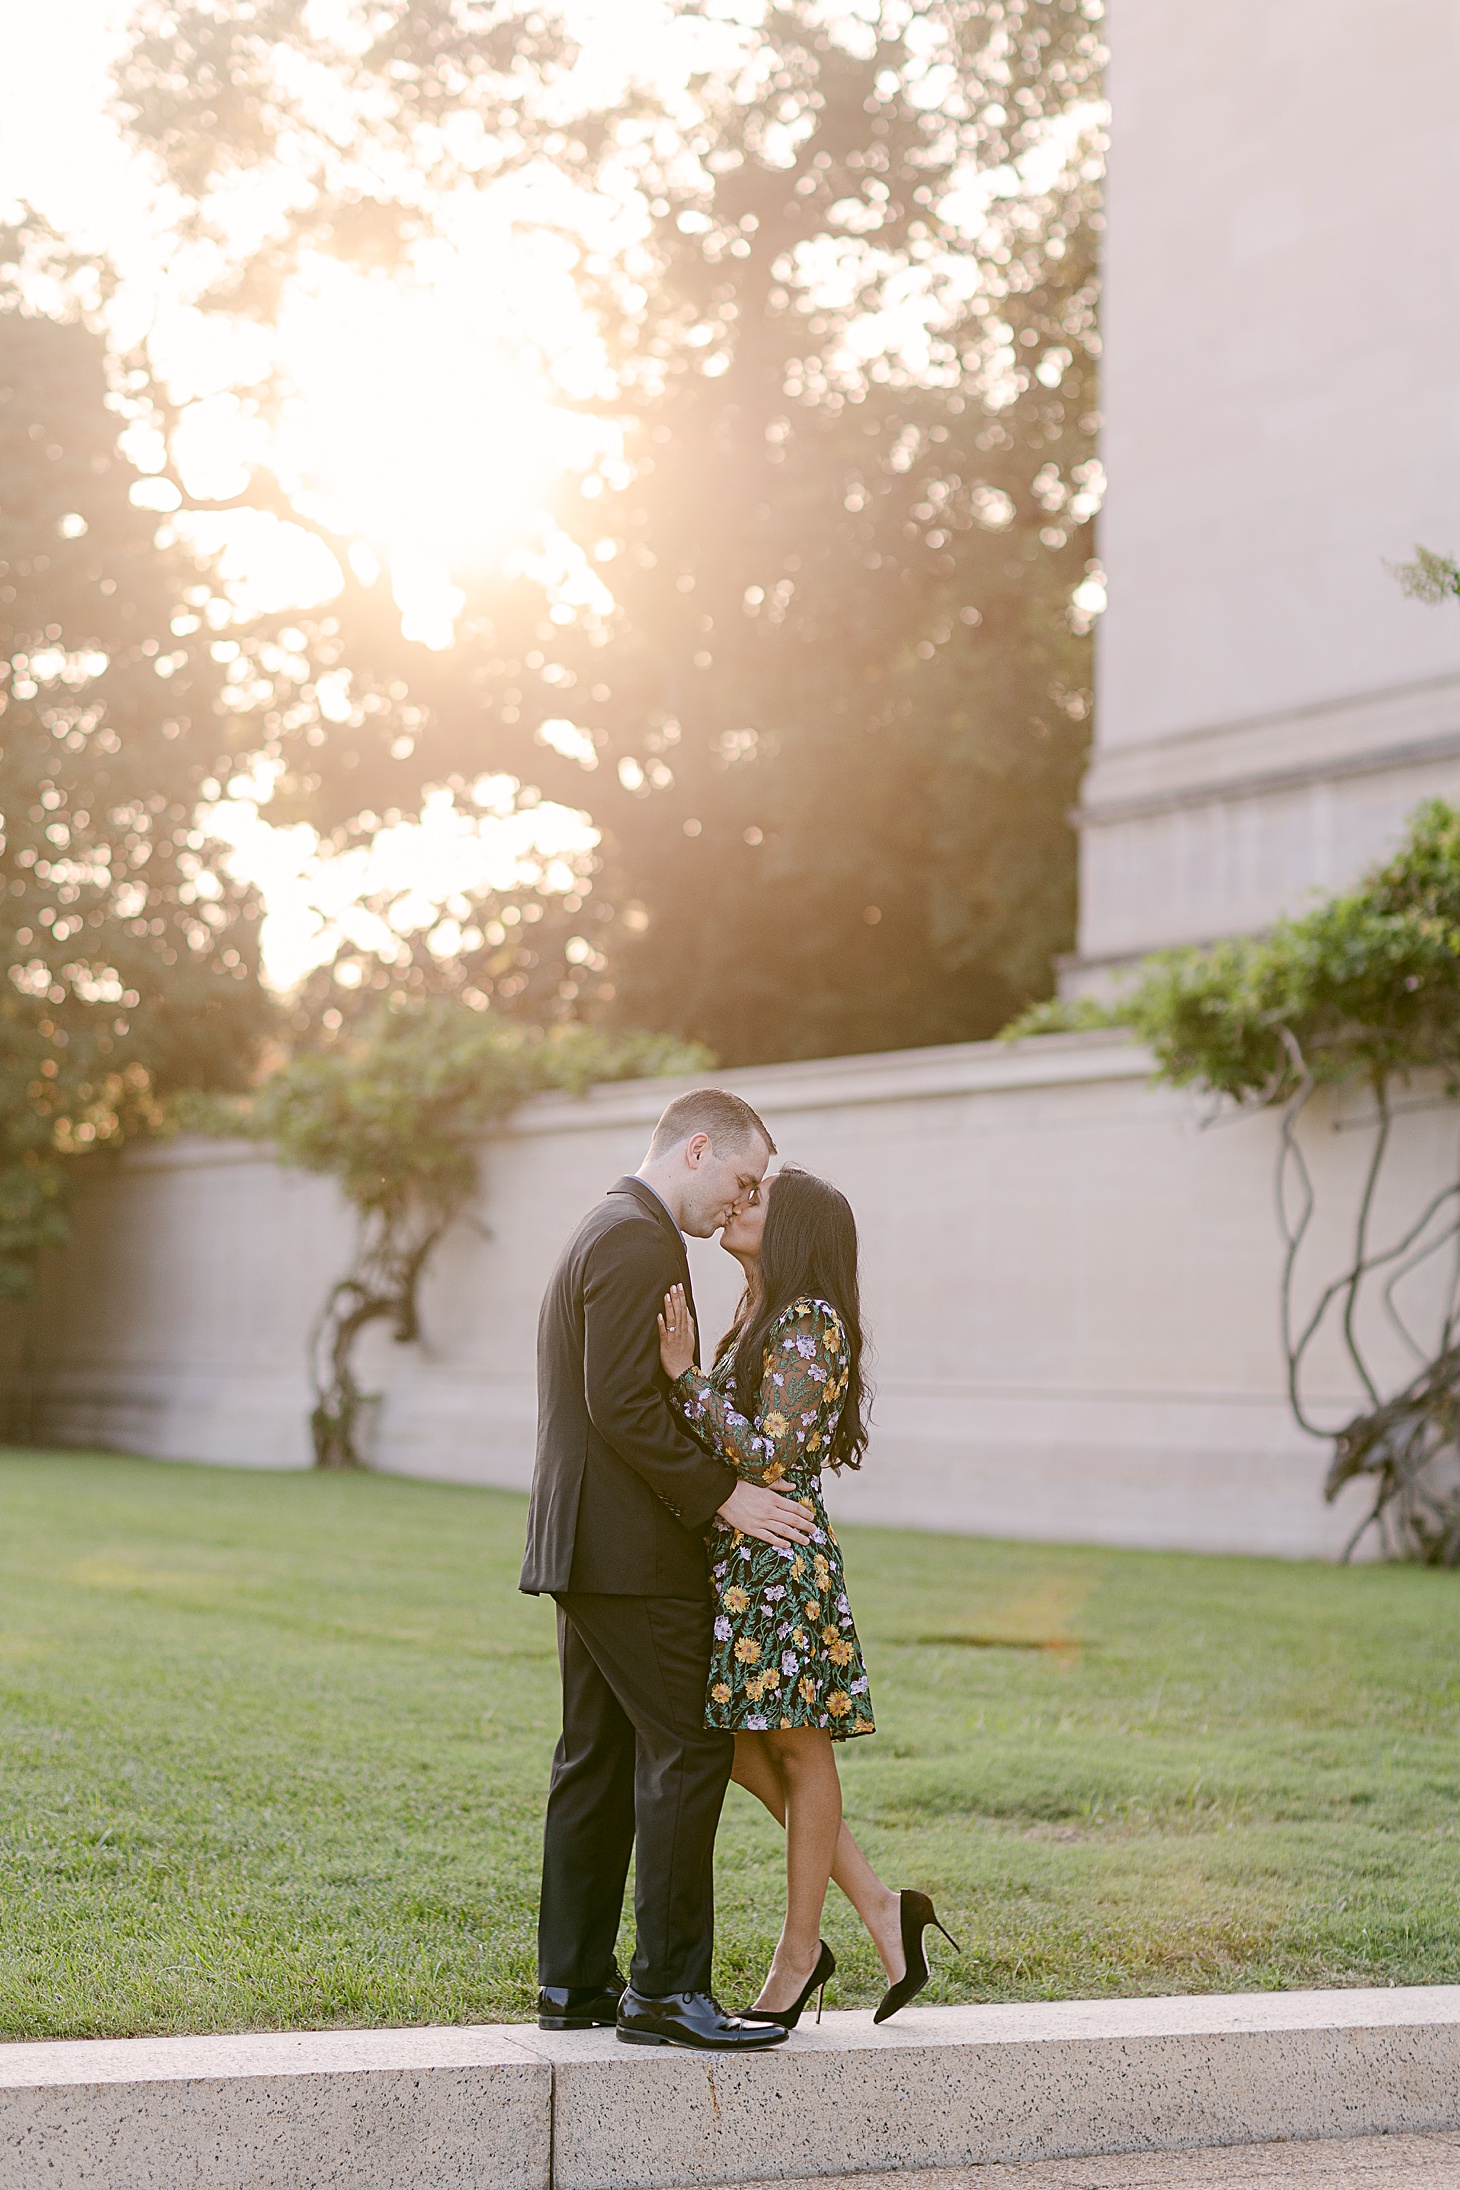  engagement portraits at National Gallery of Art by Sarah Bradshaw Photography